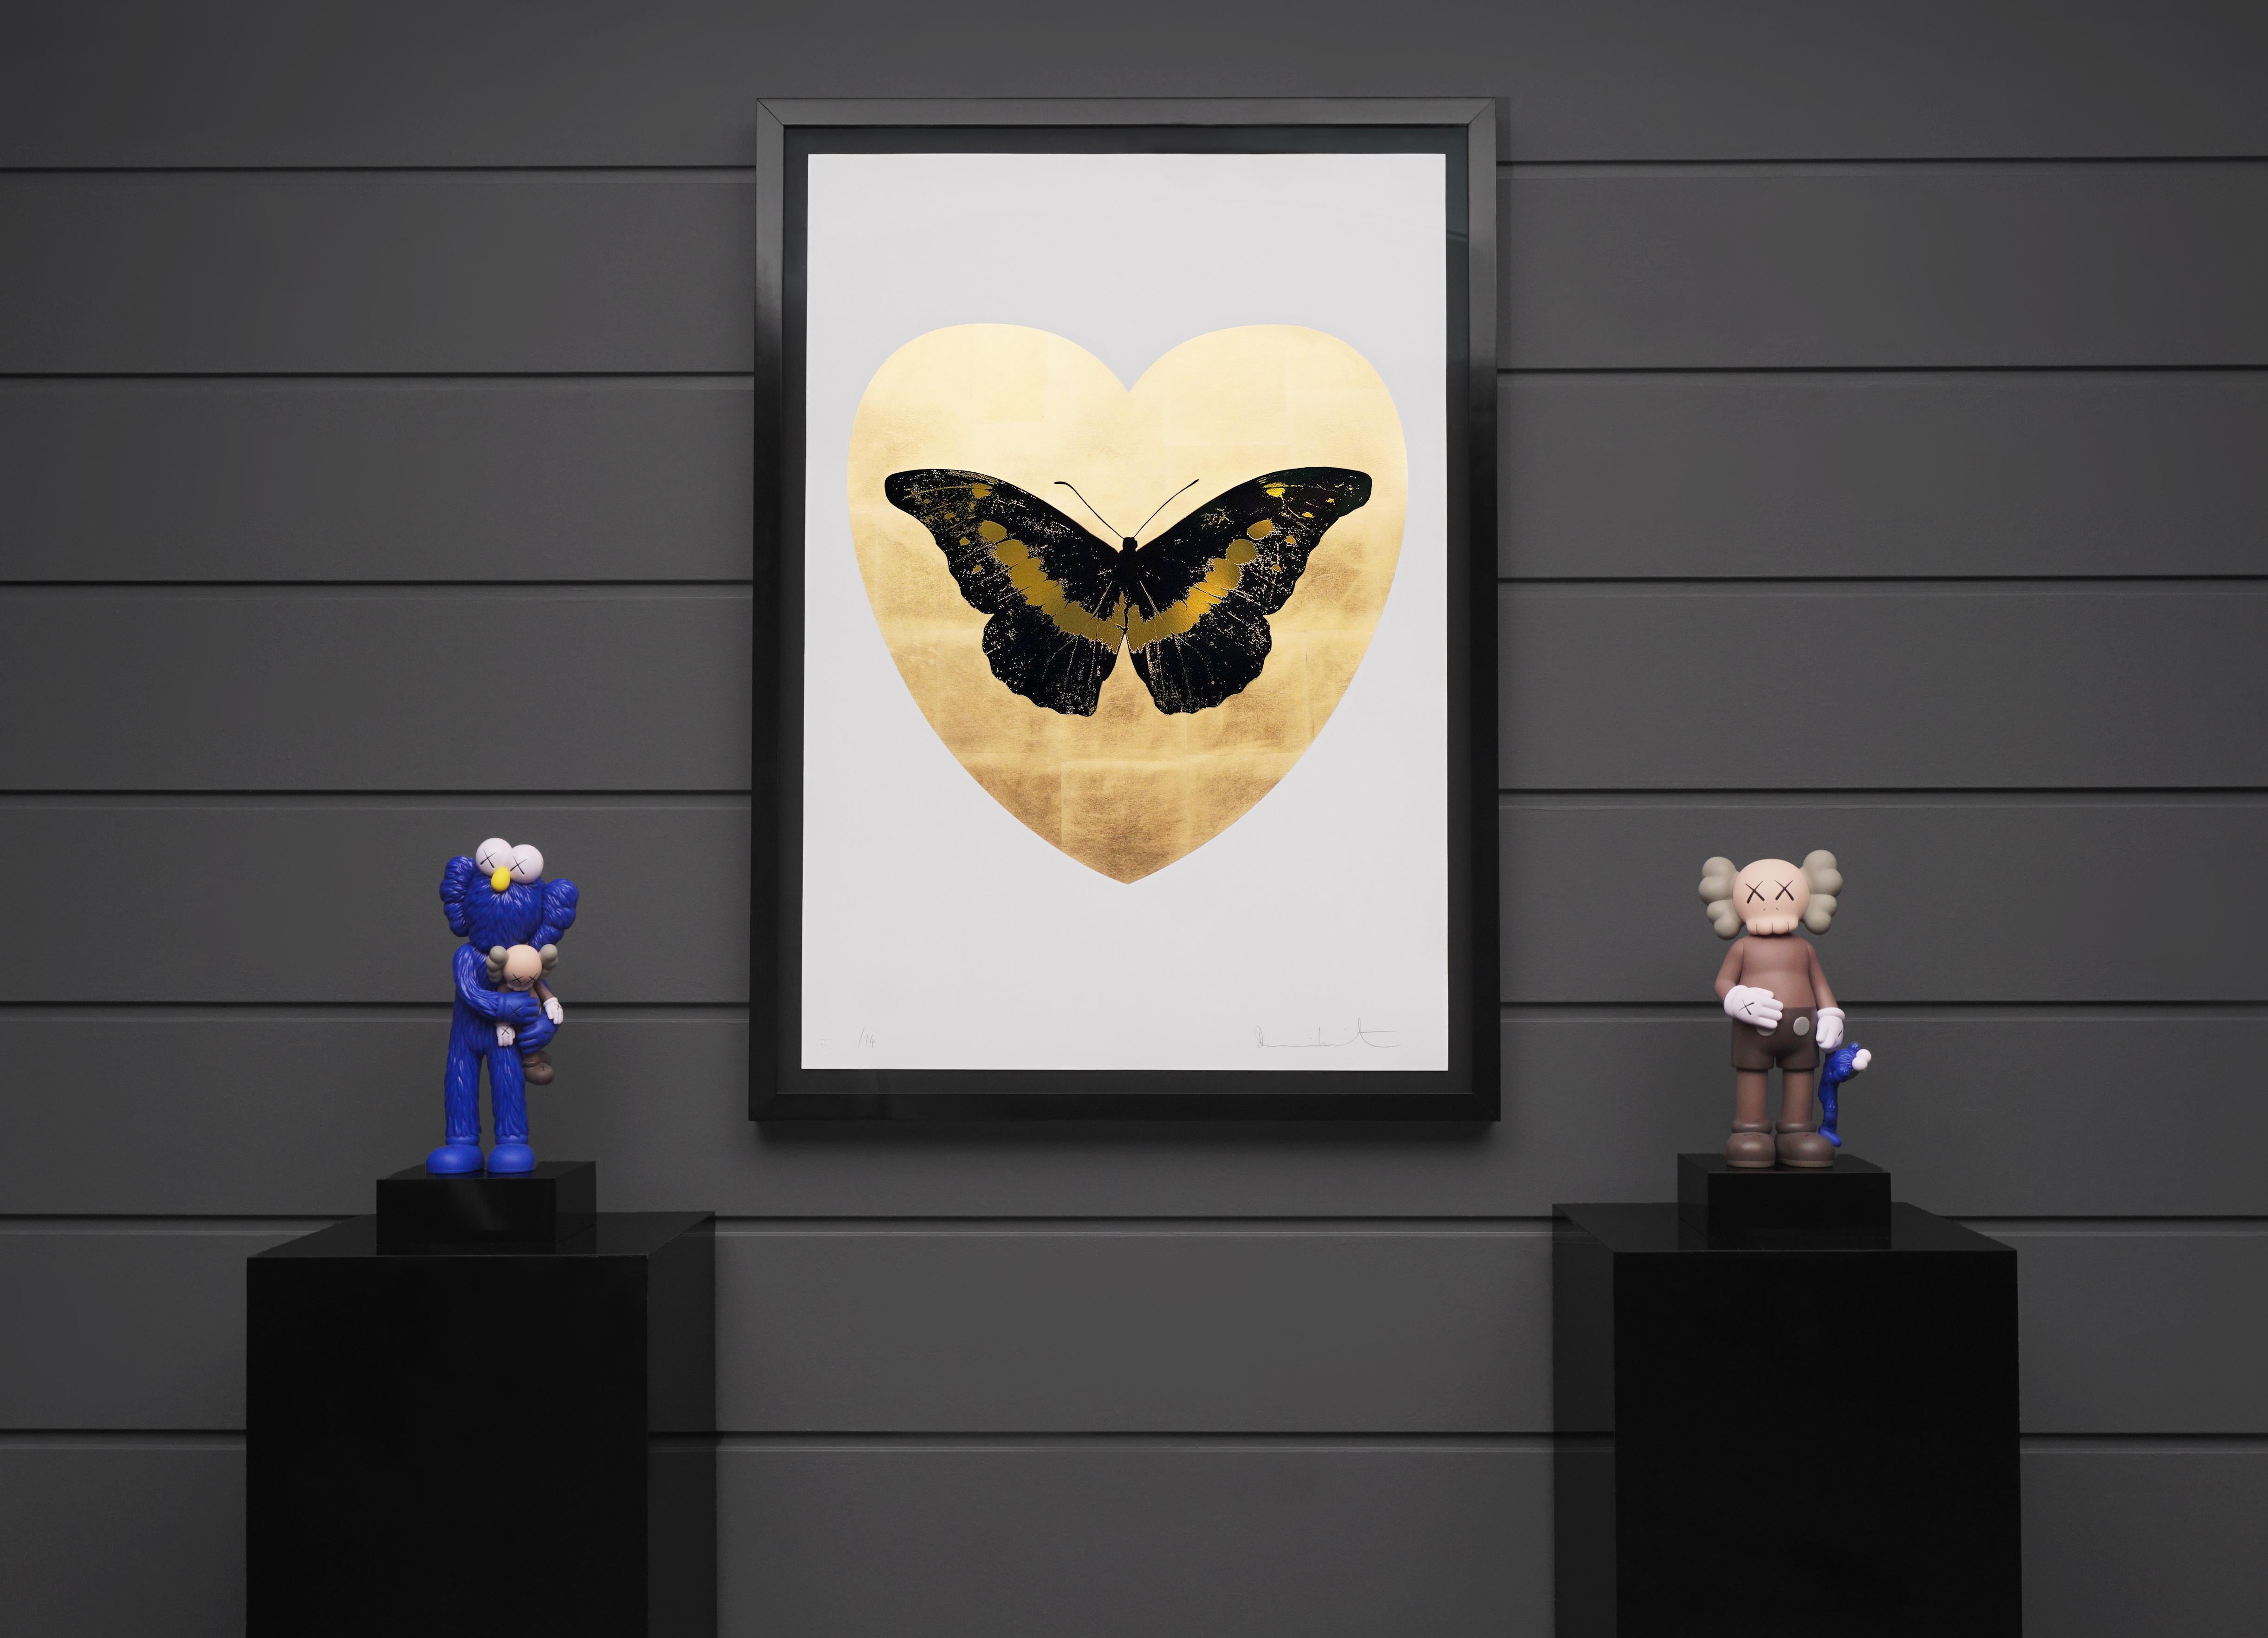 The 'I Love You' Butterfly in Black and Gold is a limited edition silkscreen print by Damien Hirst. This uplifting artwork features a foil-block butterfly, surrounded by a 24K gold leaf heart and set on a white background of Somerset Satin 410gsm